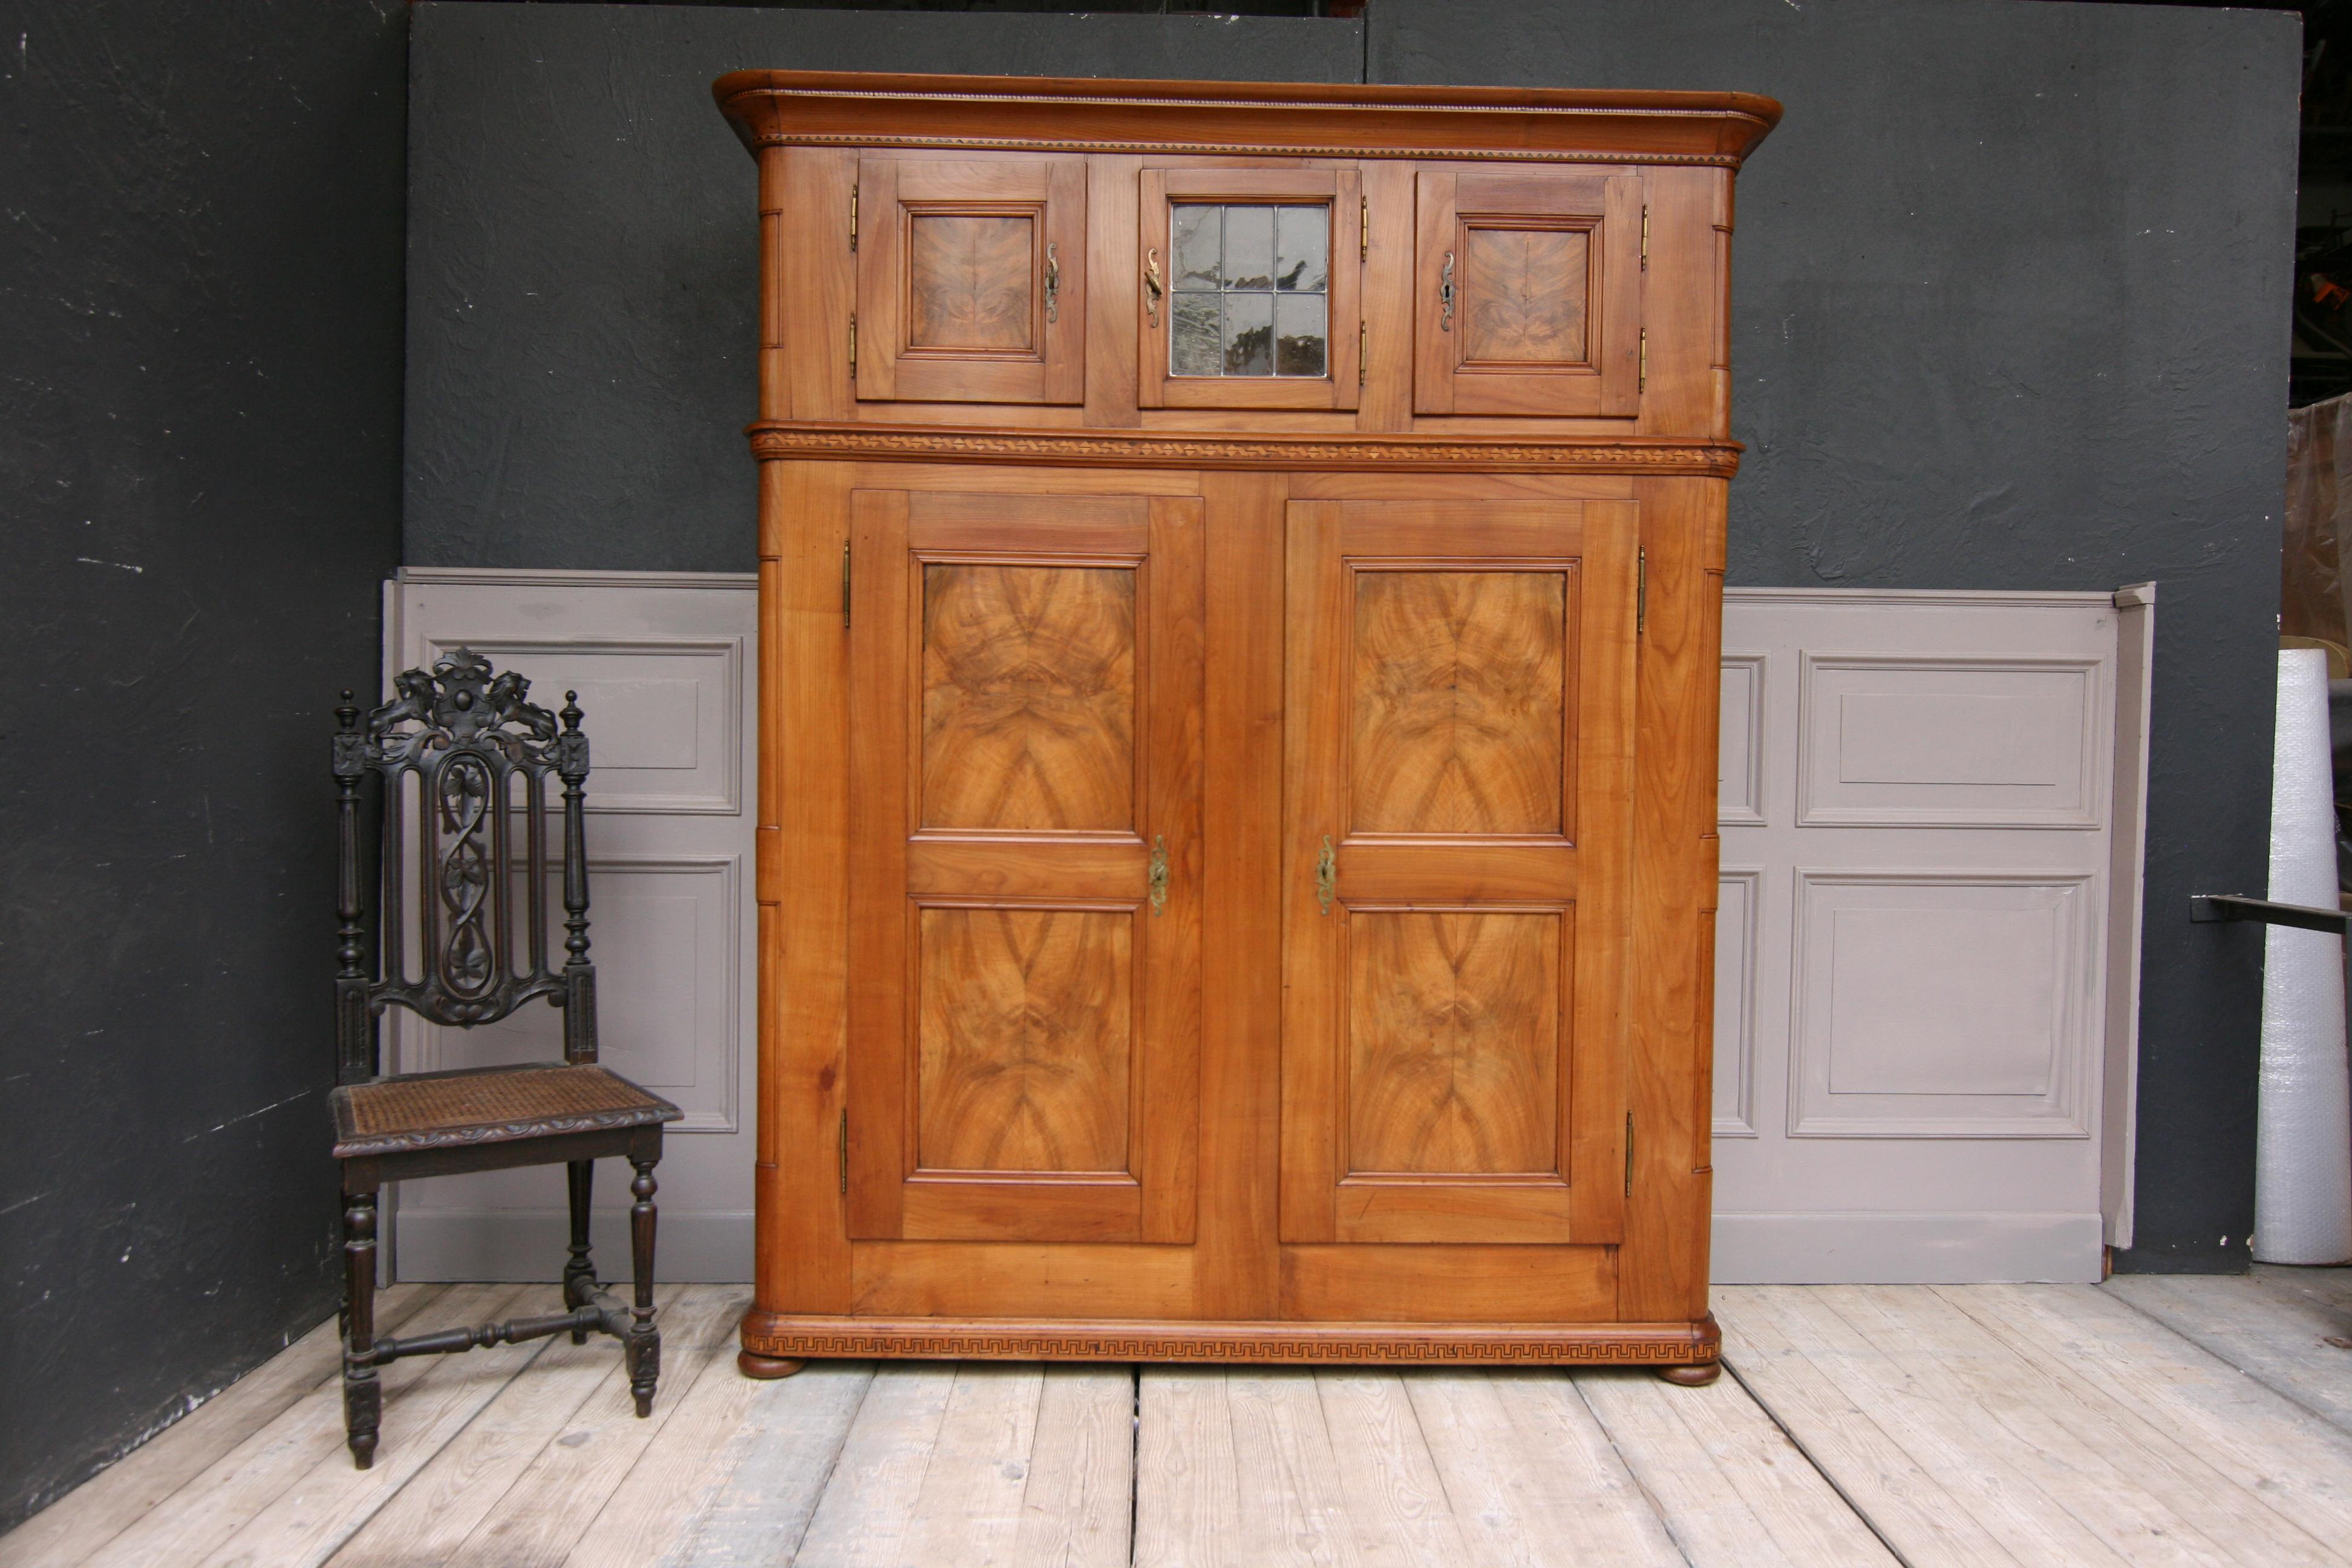 Early 19th Century Swiss Cupboard made of Cherry Wood with Marquetry (Biedermeier)